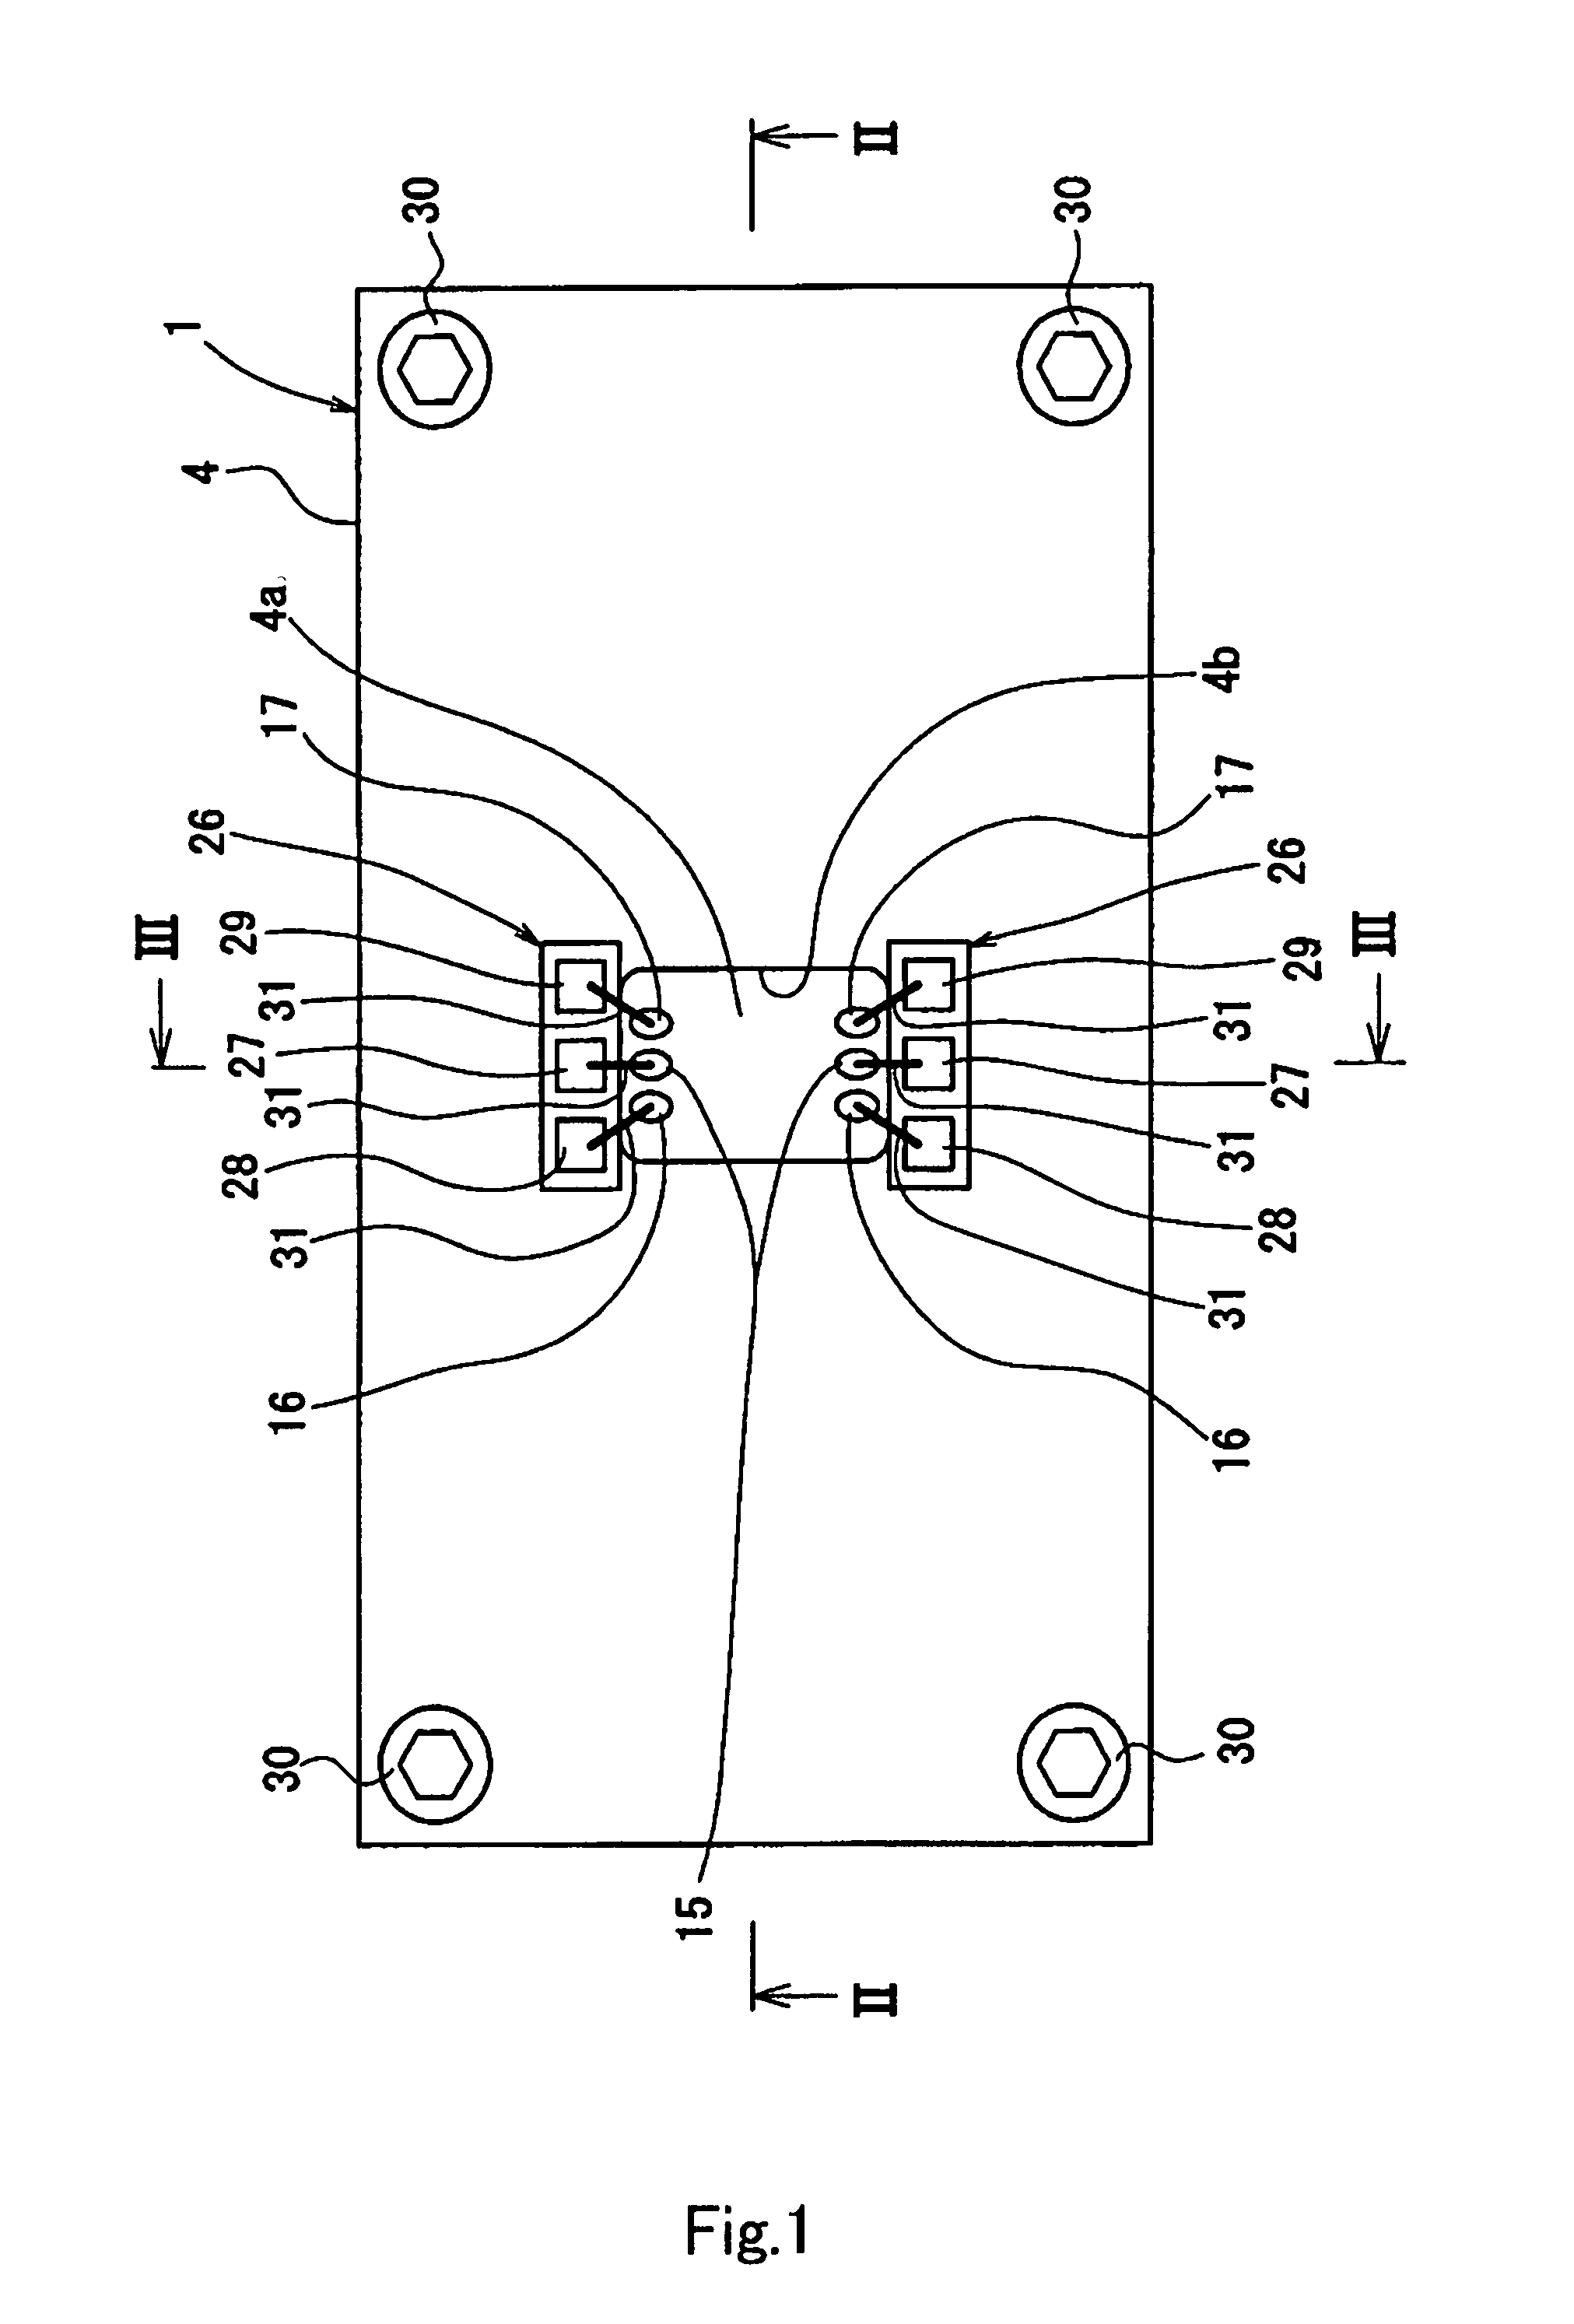 Package structure of sensor and flow sensor having the same